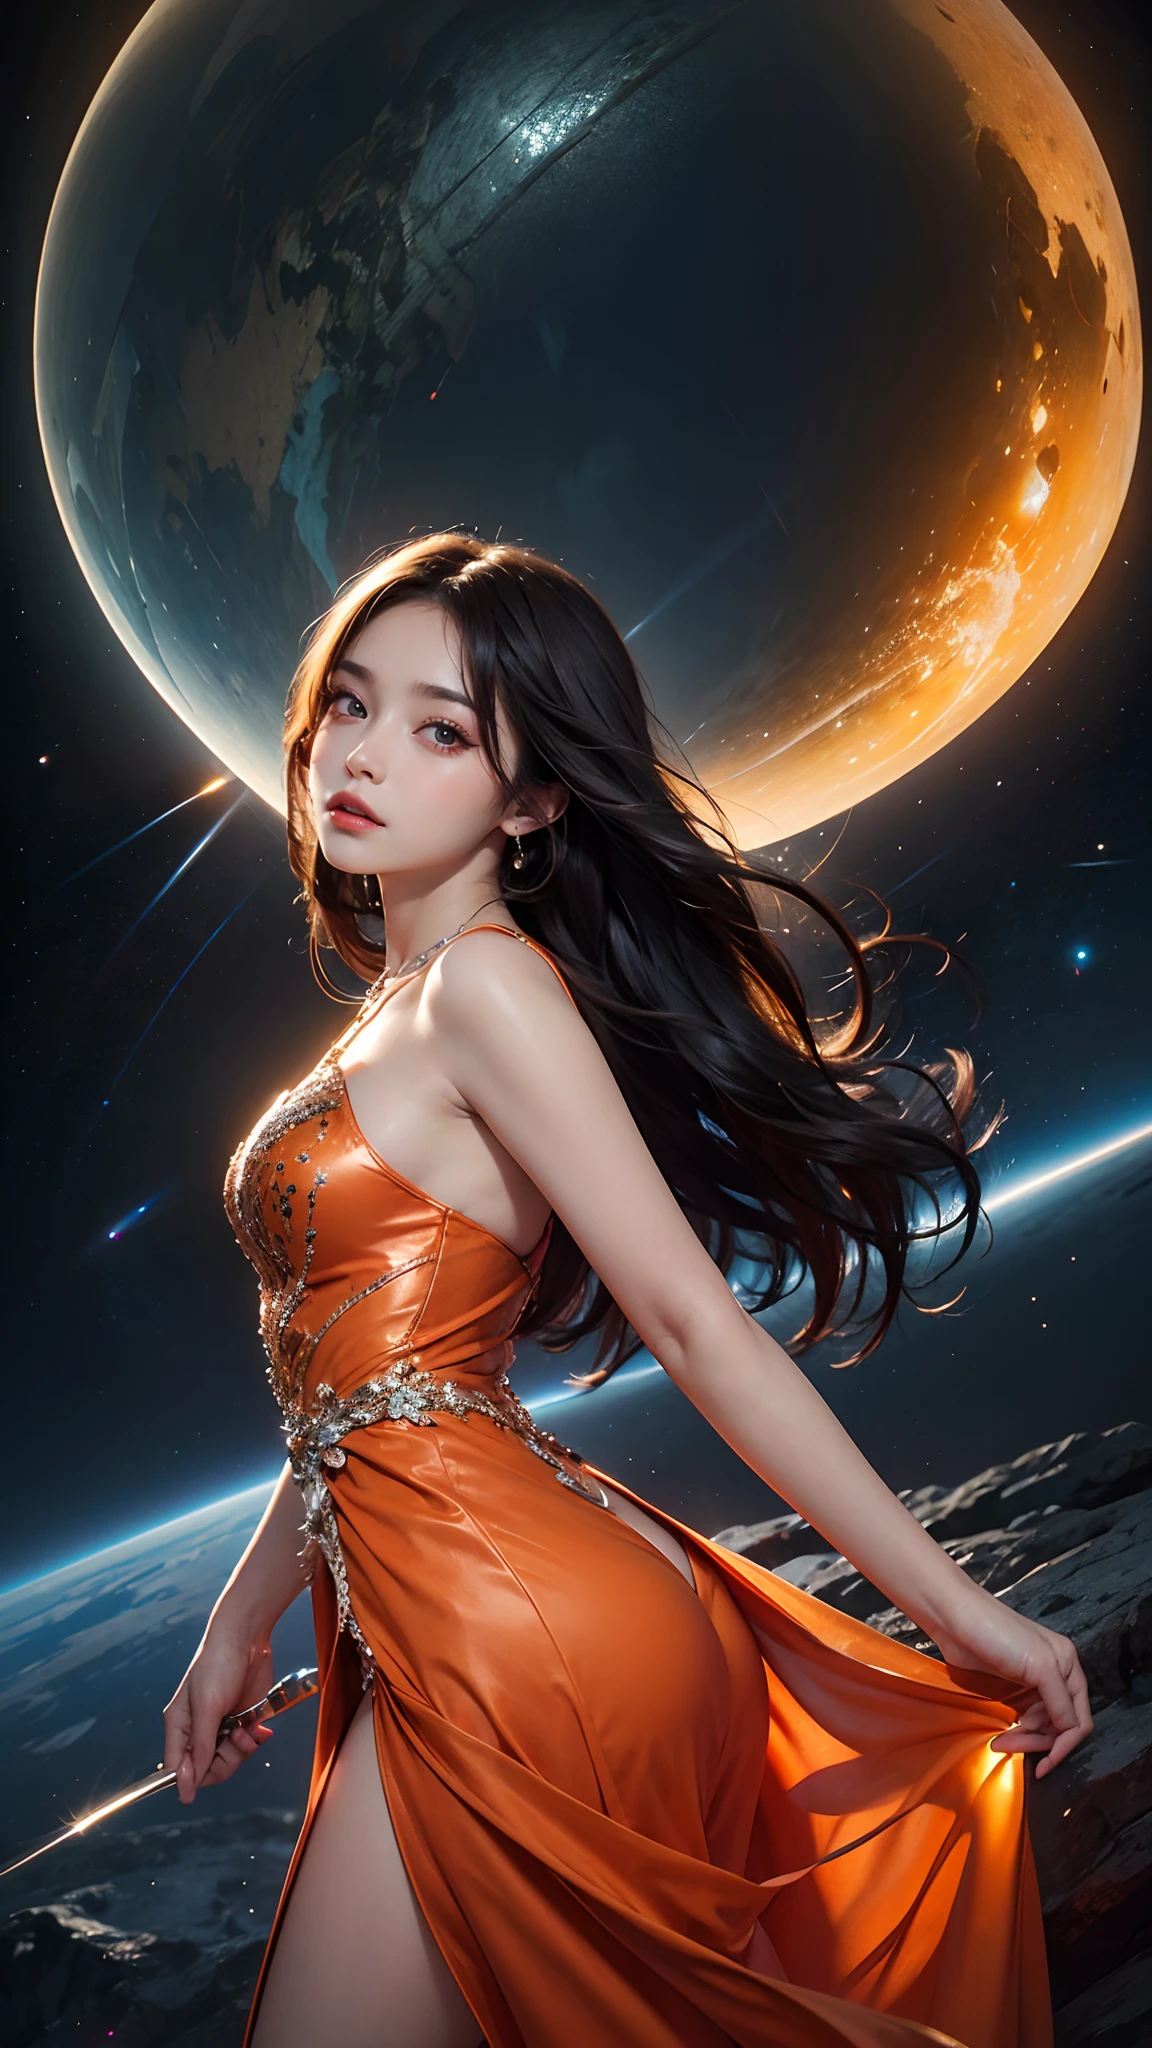 8K ultra hd, masterpiece, best quality, a beautiful girl, long hair, impressive hairstyle, crystal dress, orange dress, (shining:1.2), glowing skin, disco lighting, space background, attractive poses,